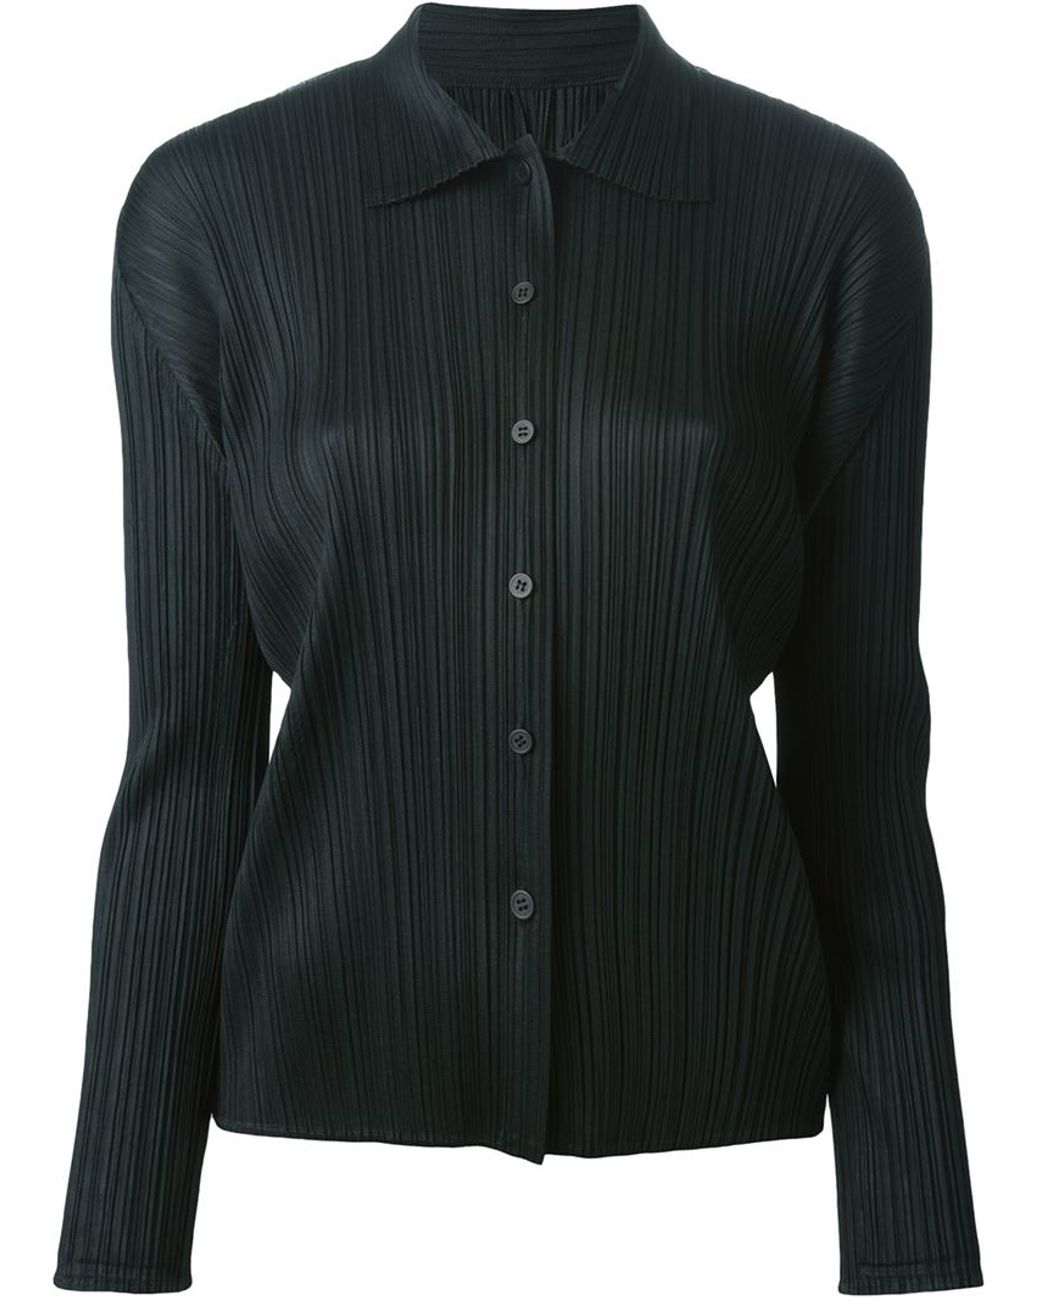 Pleated Shirt - Buy Pleated Shirt online in India